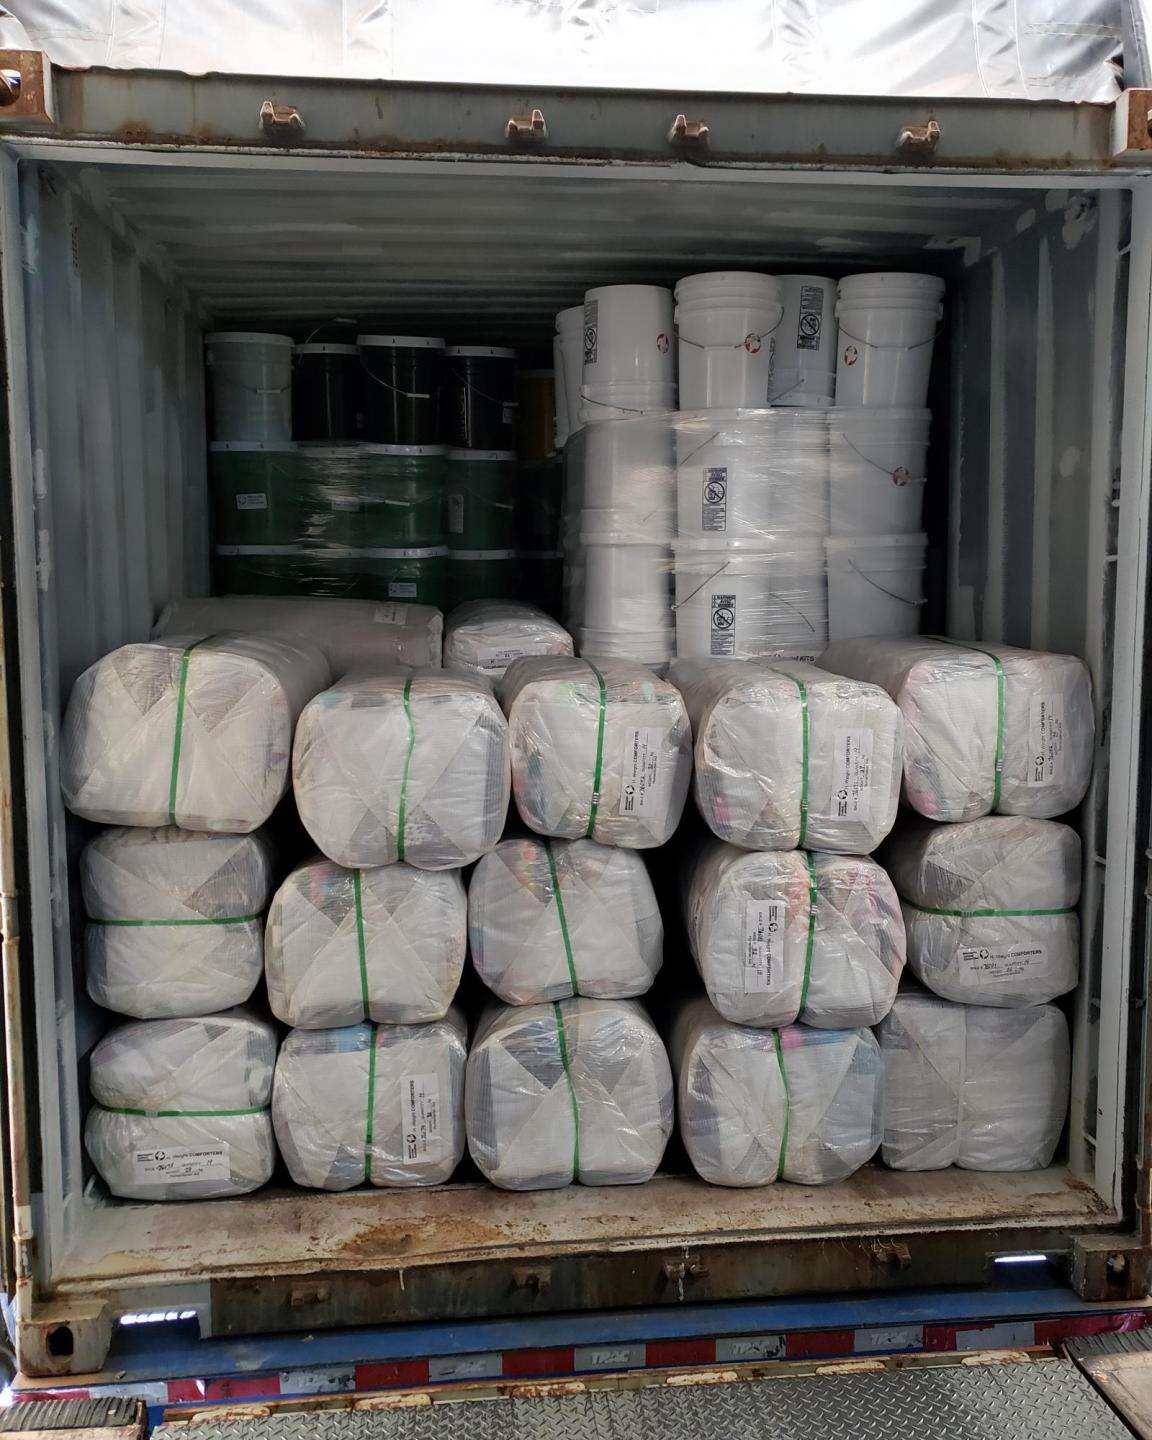 A shipping container filled with white plastic bales and buckets.